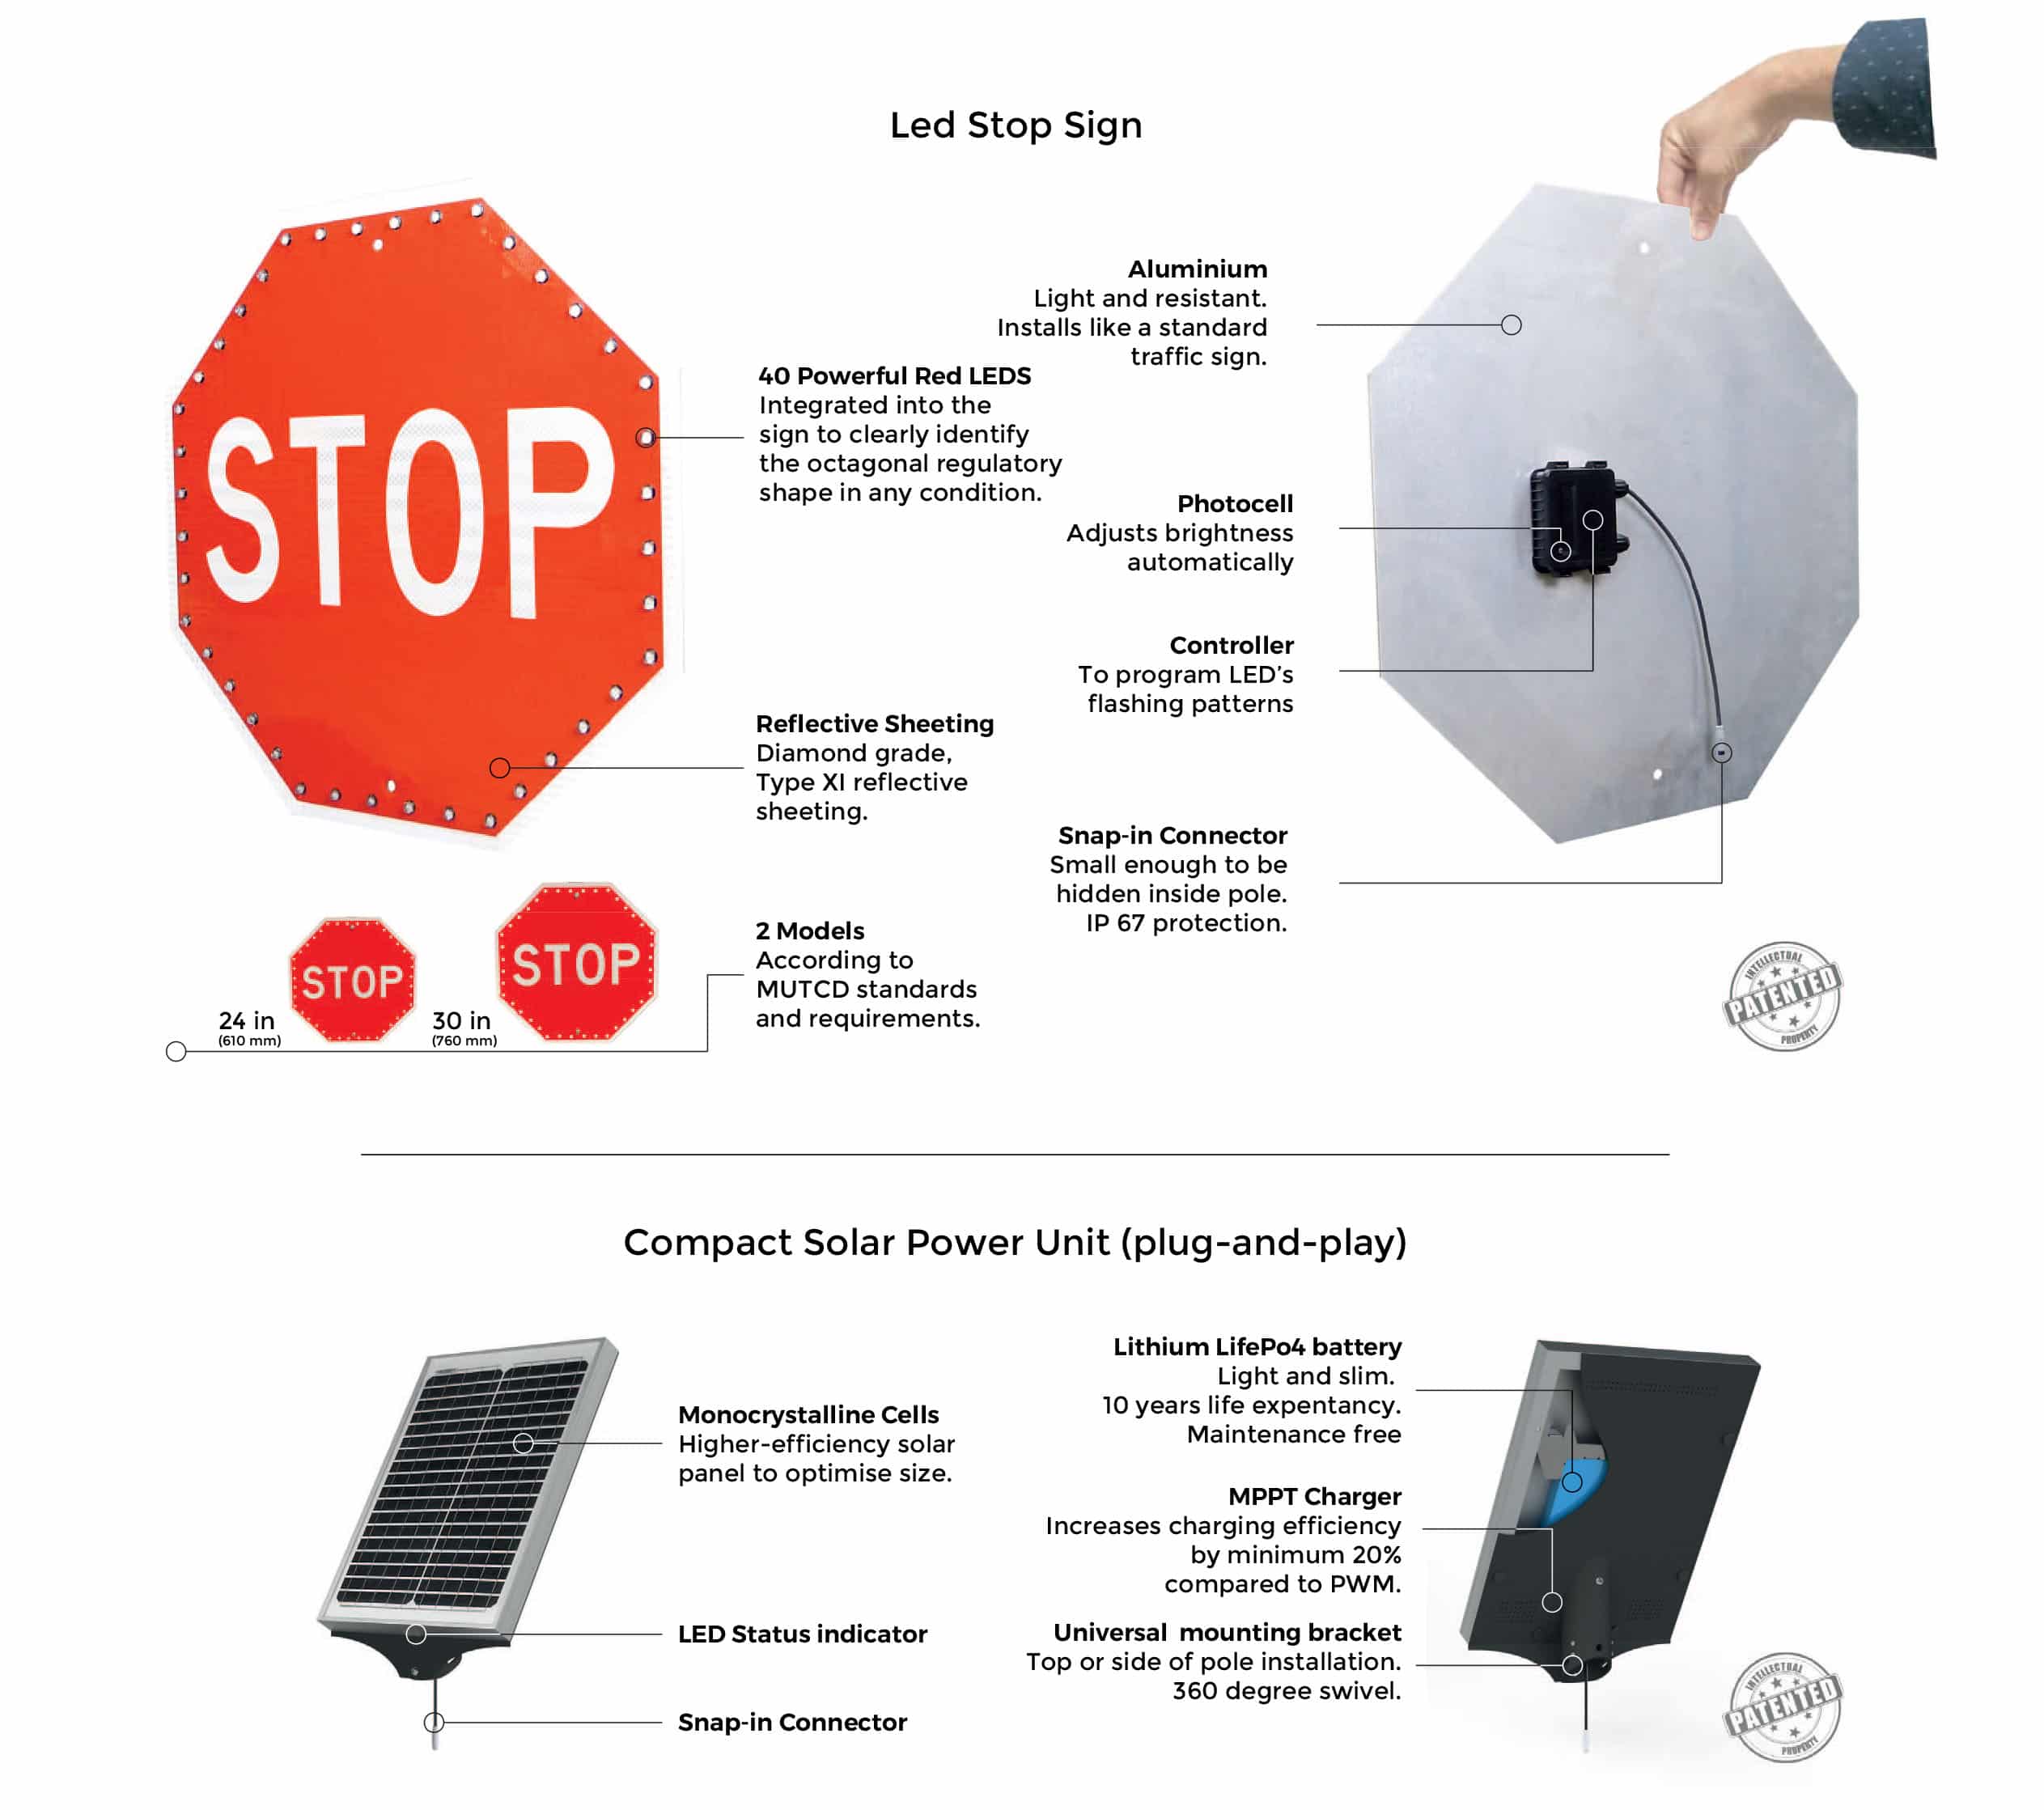 Luminous LED stop sign - Electronic Traffic Sign - THIN - Traffic Innovation